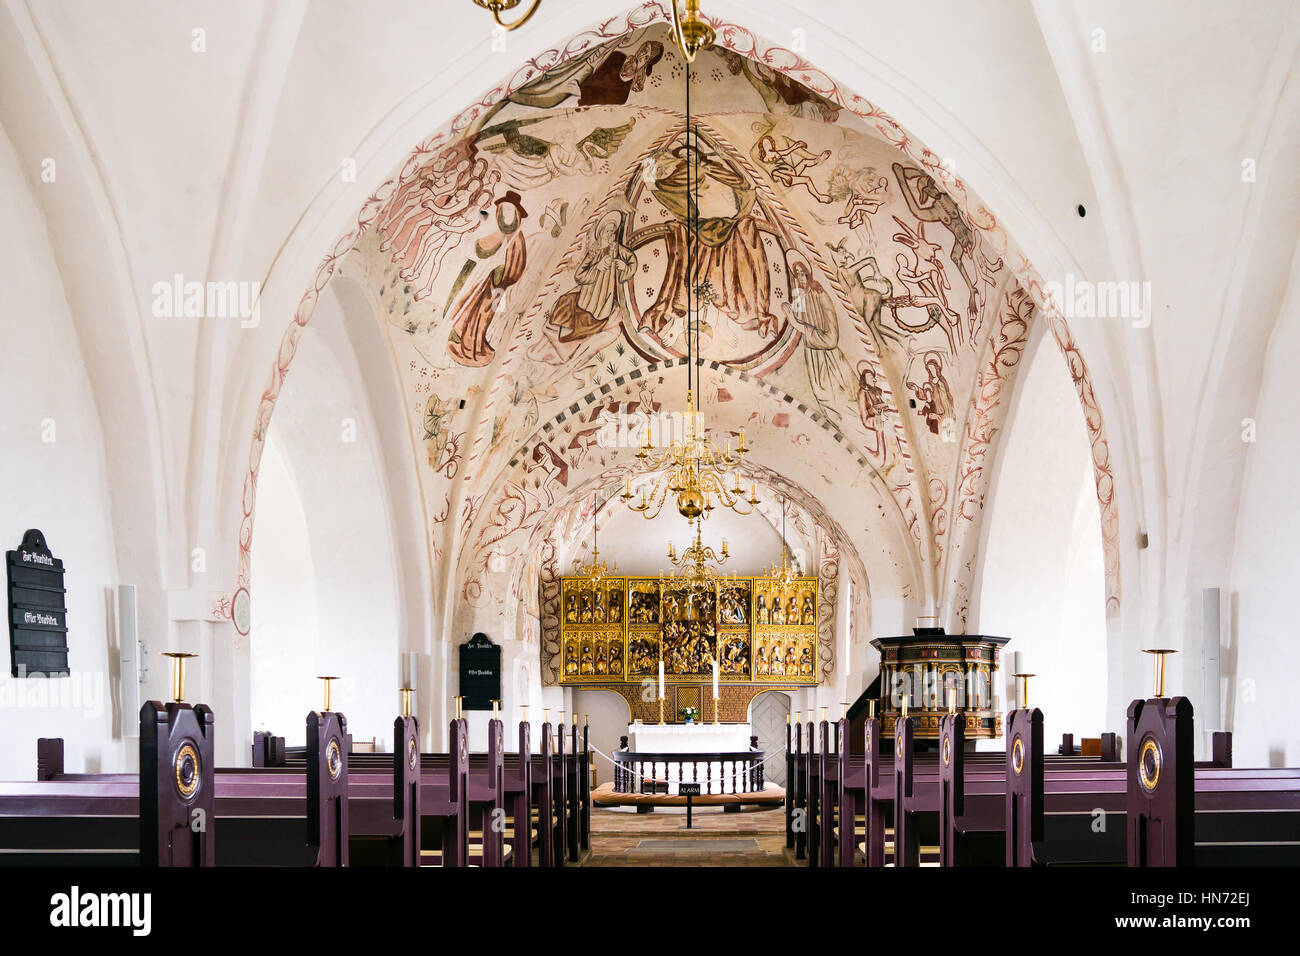 A white lutheran church in Denmark with famous frescos, Sanderum, January 19, 2015 Stock Photo